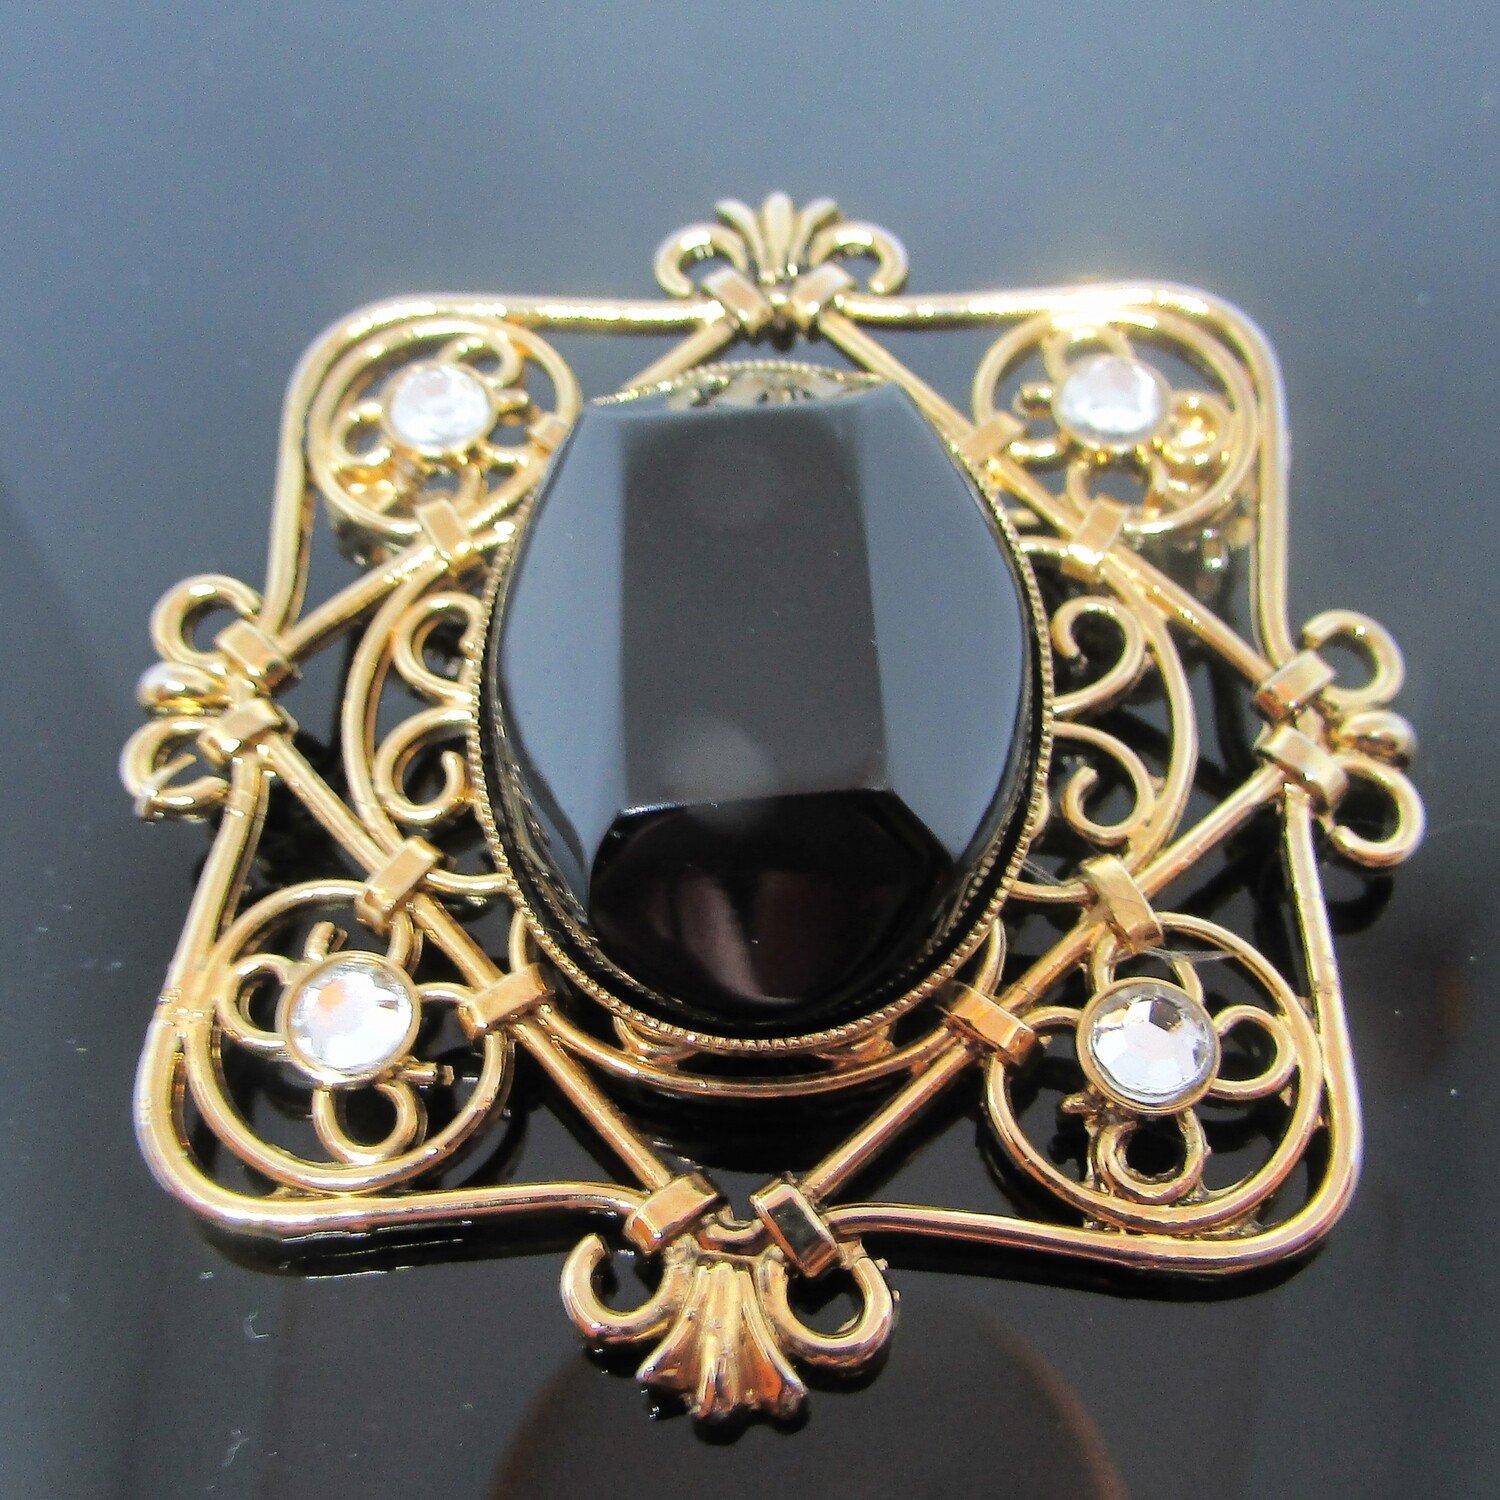 Gold and Noir Brooch with Rhinestone accents c. 1980's